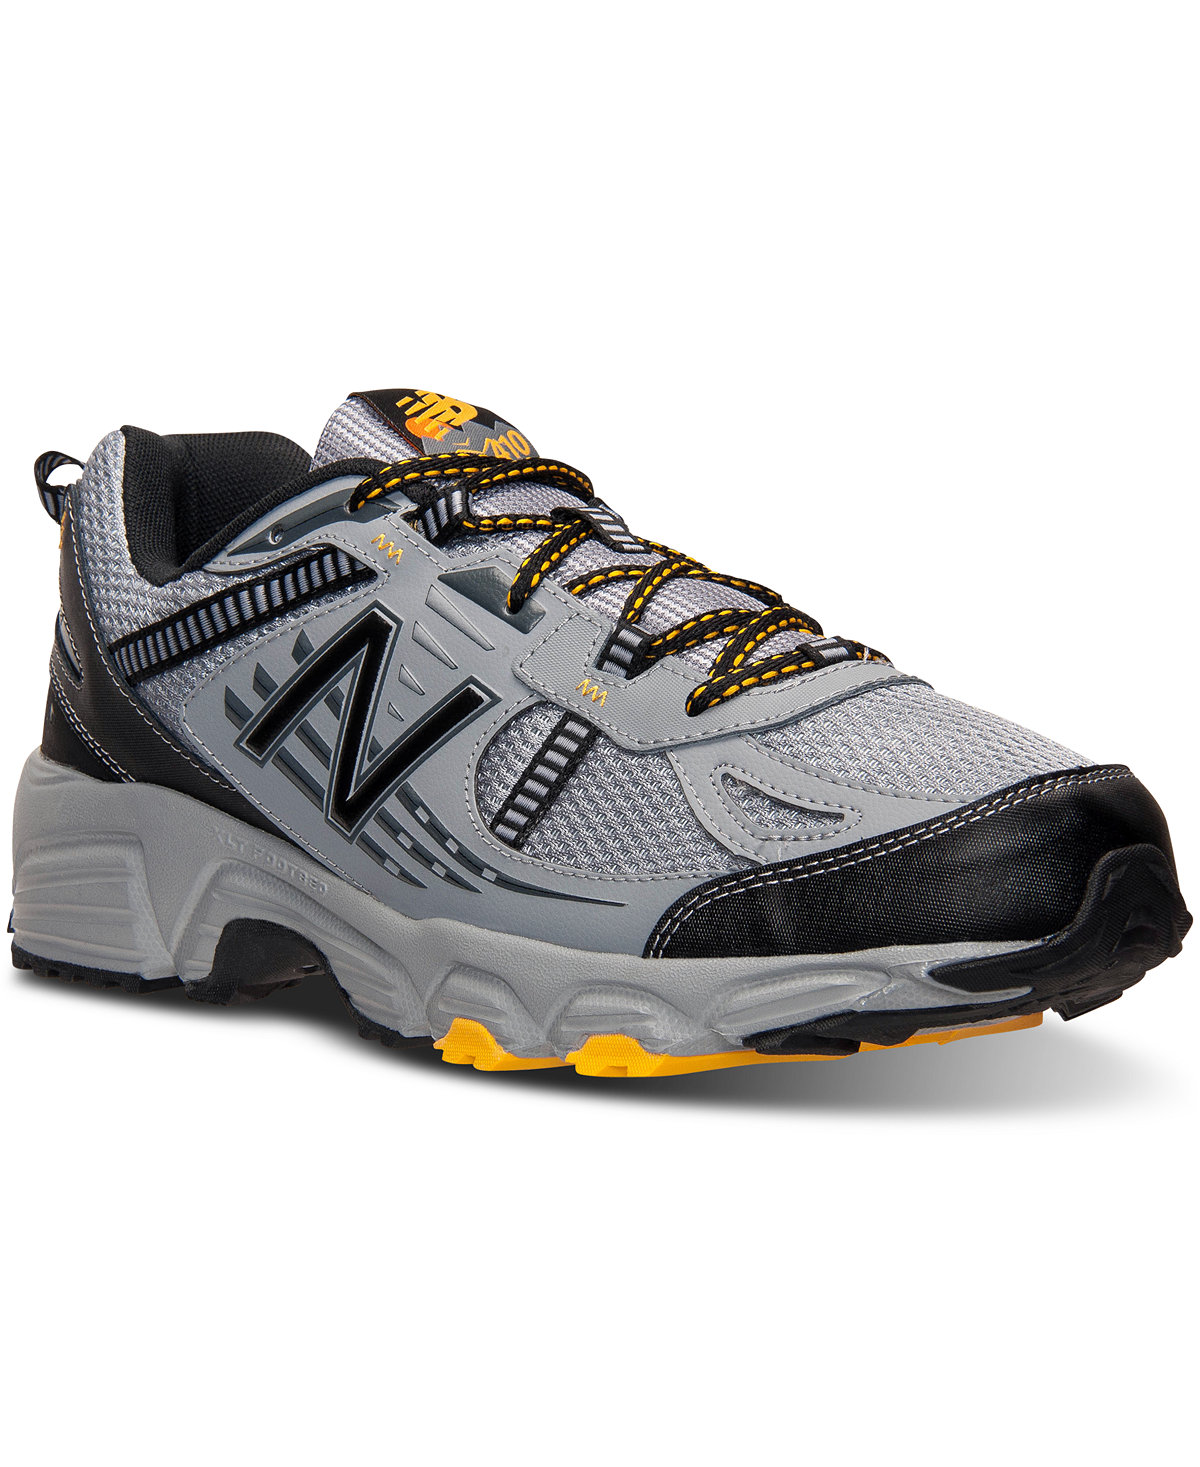 New Balance men’s MT 410 running shoes for $25